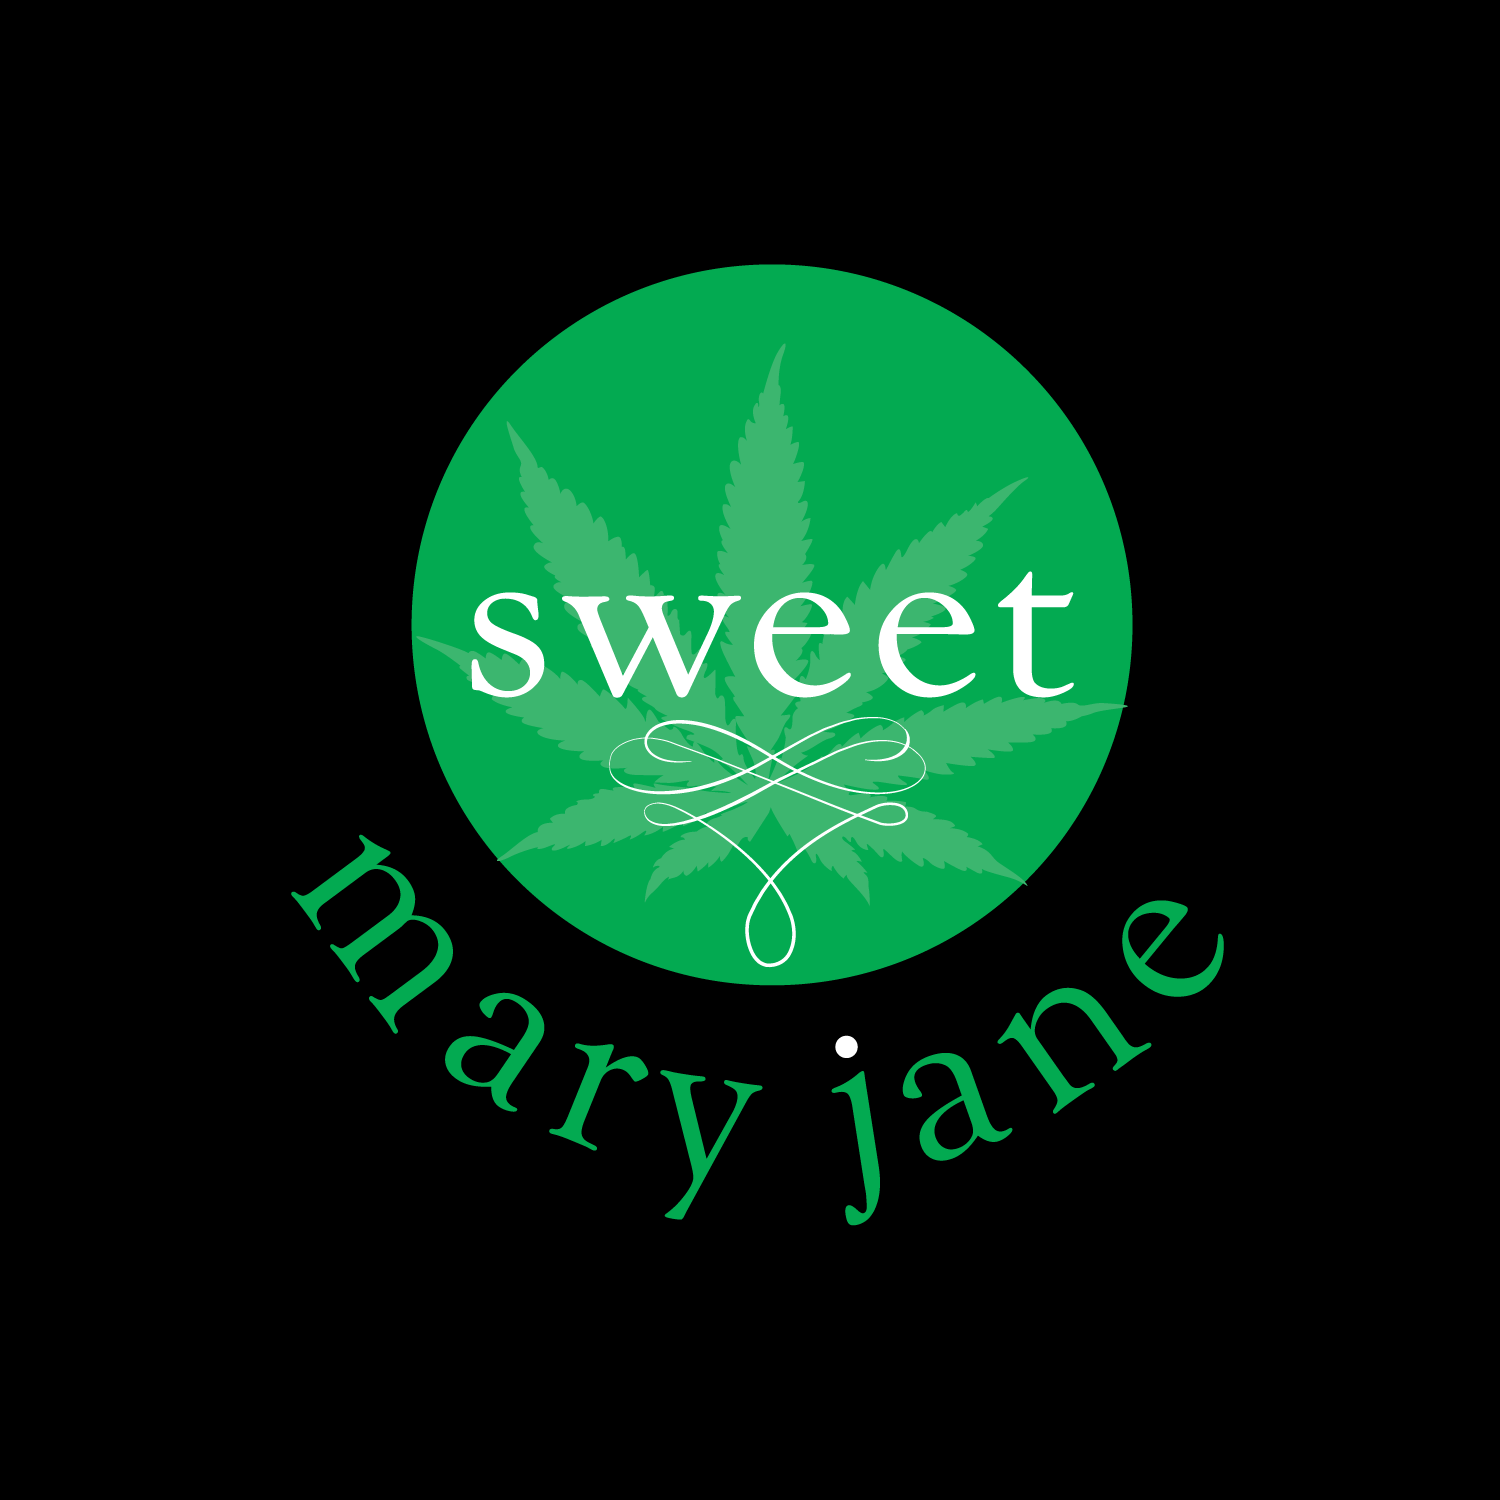 Sweet Mary Jane’s – MJ for MDs